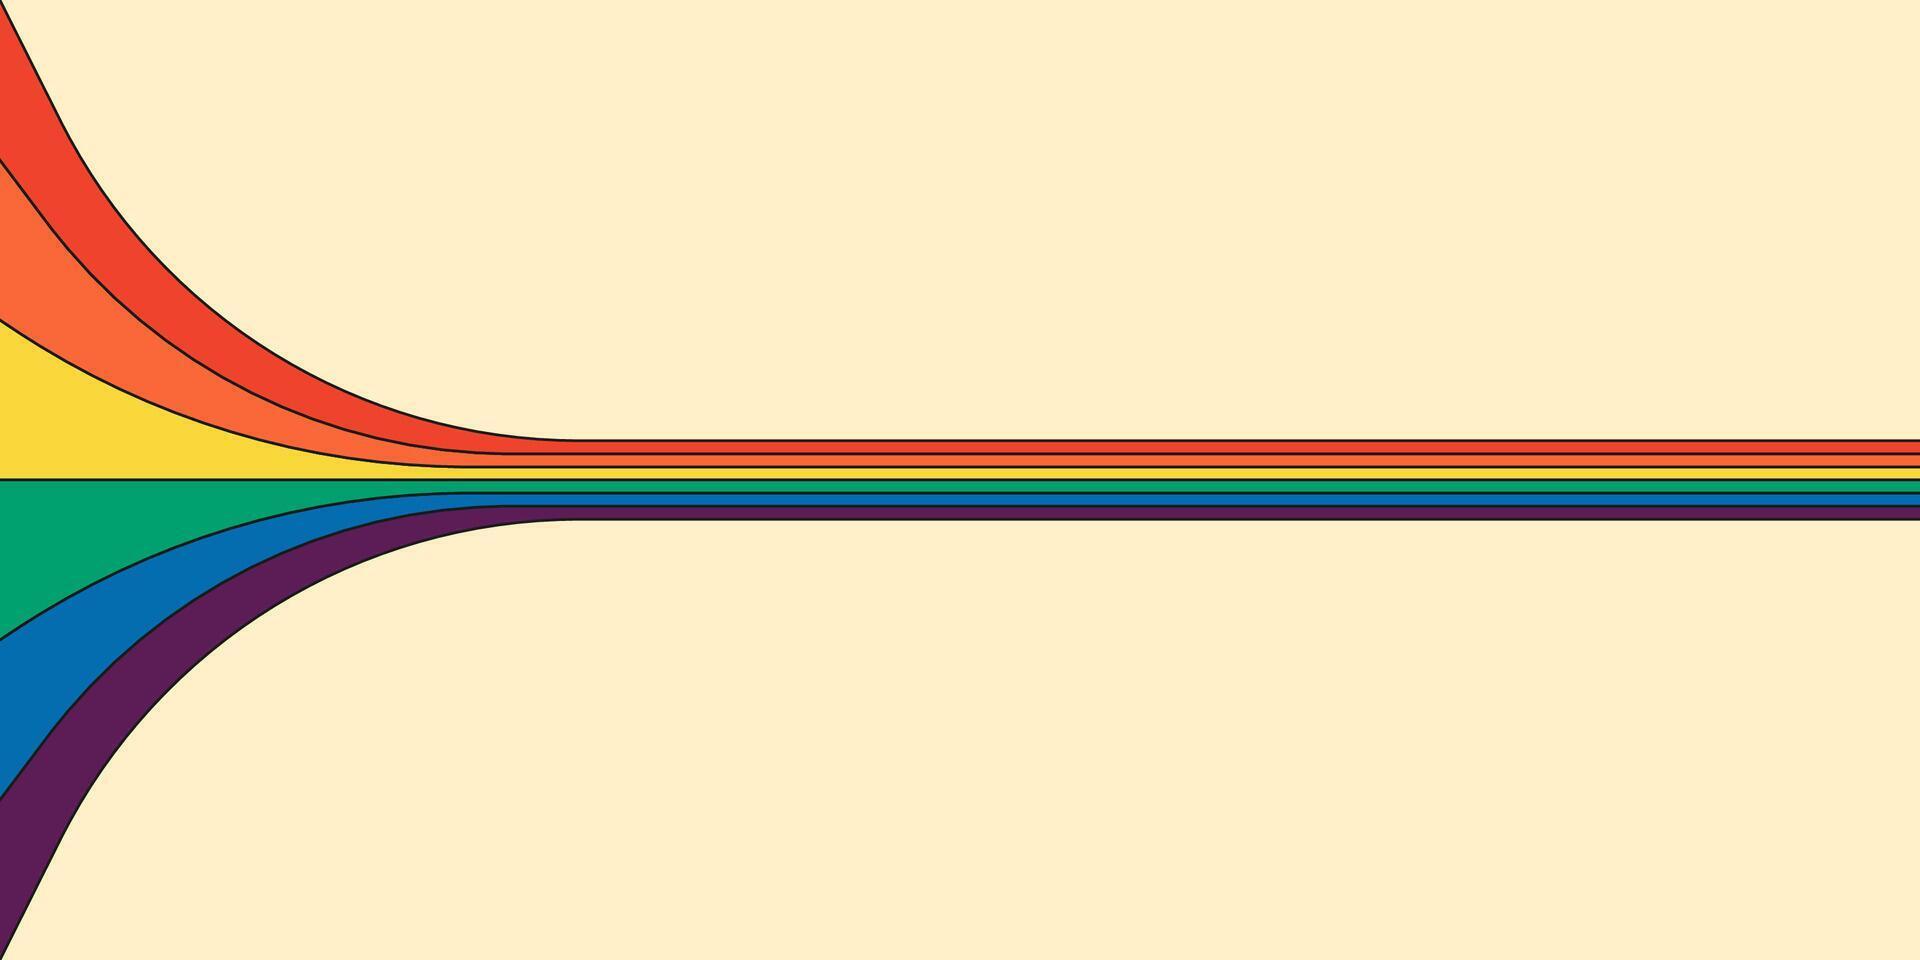 Retro rainbow color striped path horizontal banner. Graphic rainbows perspective flow cover. Vintage hippy abstract spectral iridescent lines. Trendy modern simple disco y2k colorful pop art lines vector